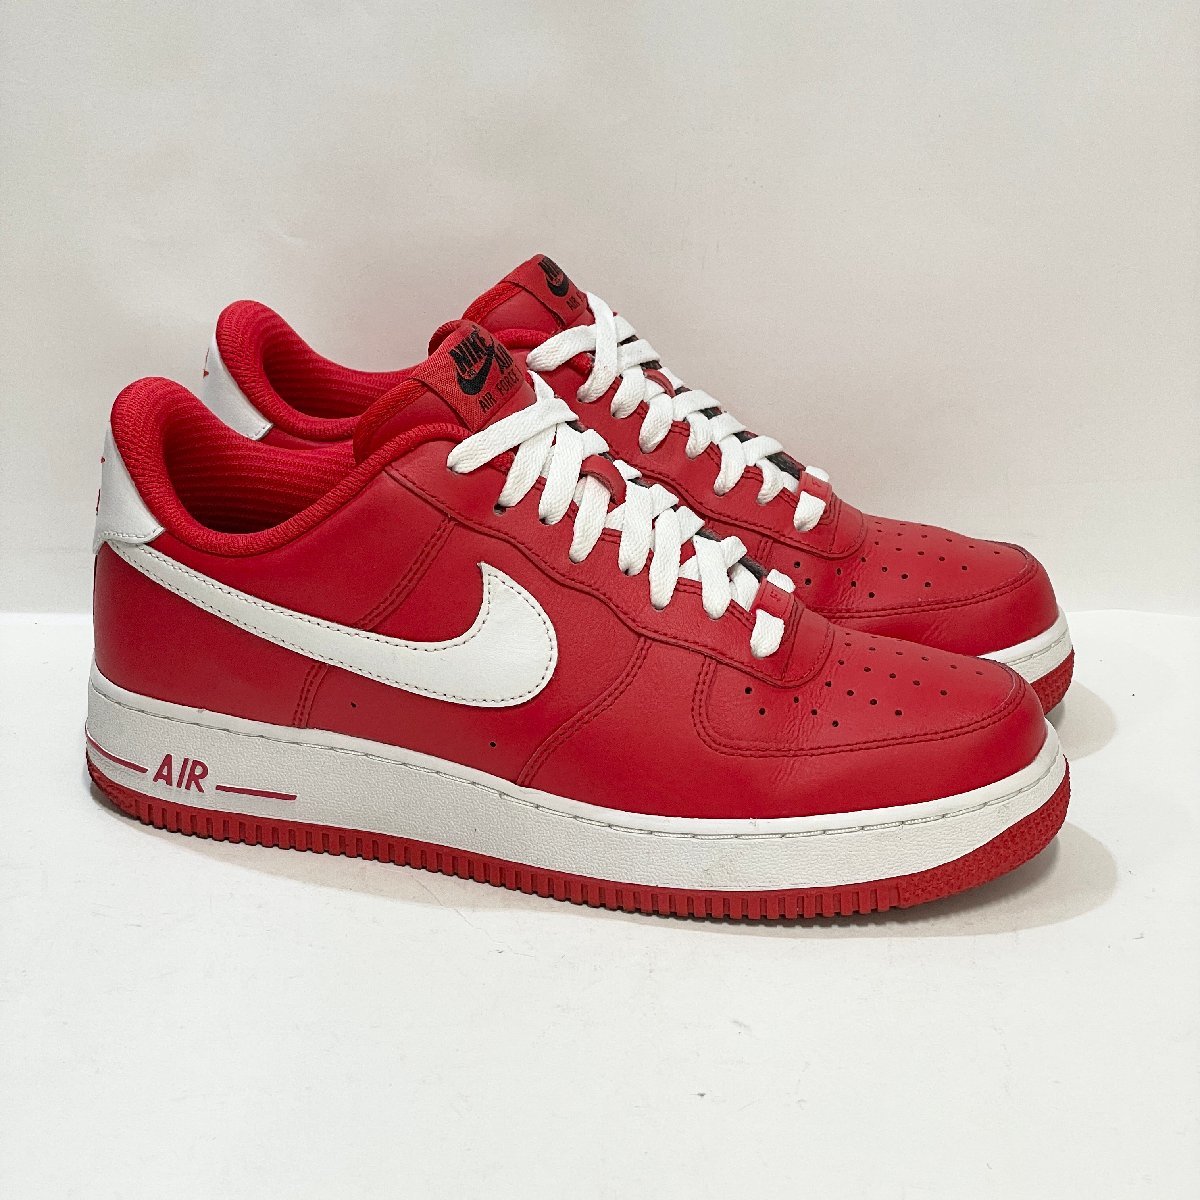 26.5cm NIKE AIR FORCE 1 AF1 BY YOU AQ3774-992 ナイキ エア